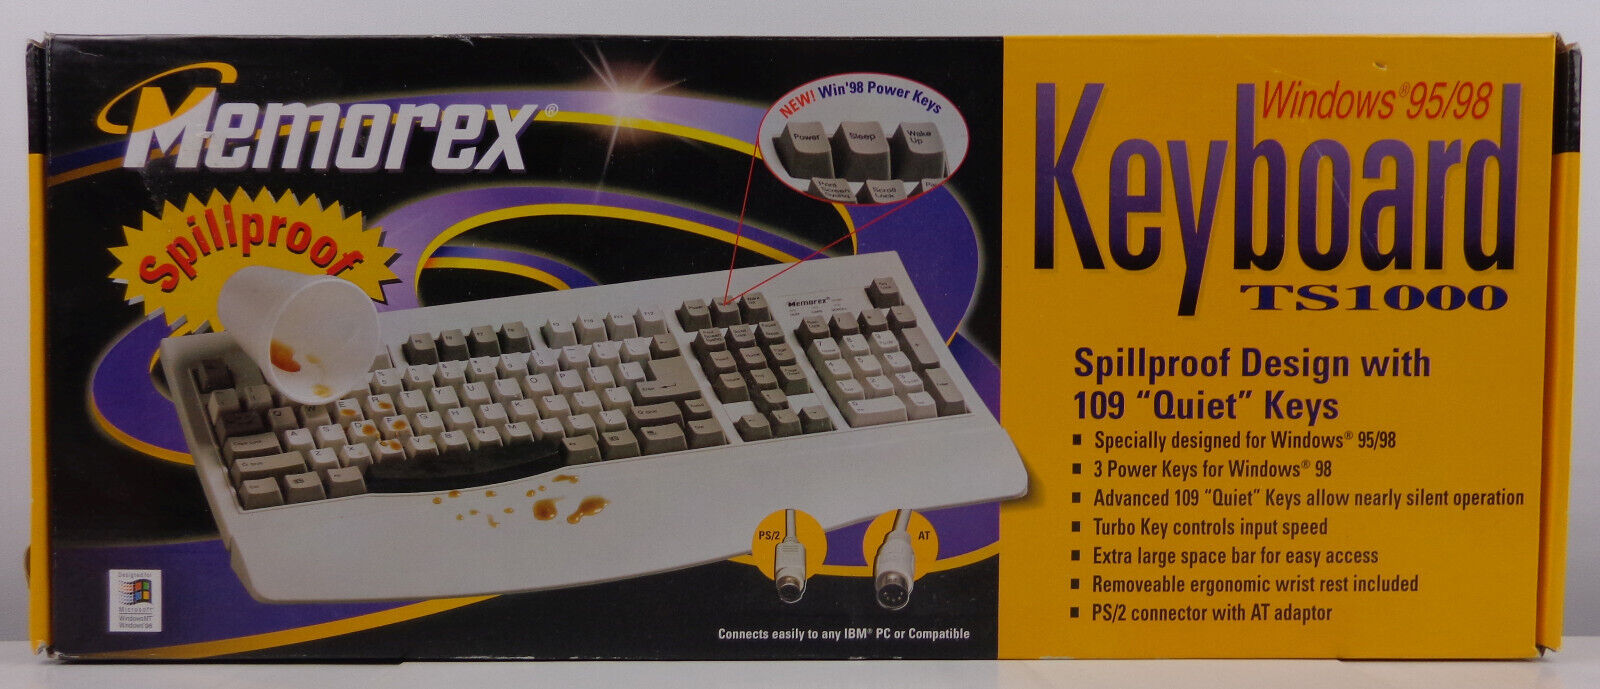 Vintage Memorex Windows 95/98 Keyboard TS1000 Spillproof 109 Quiet Keys New Box. Available Now for 40.00